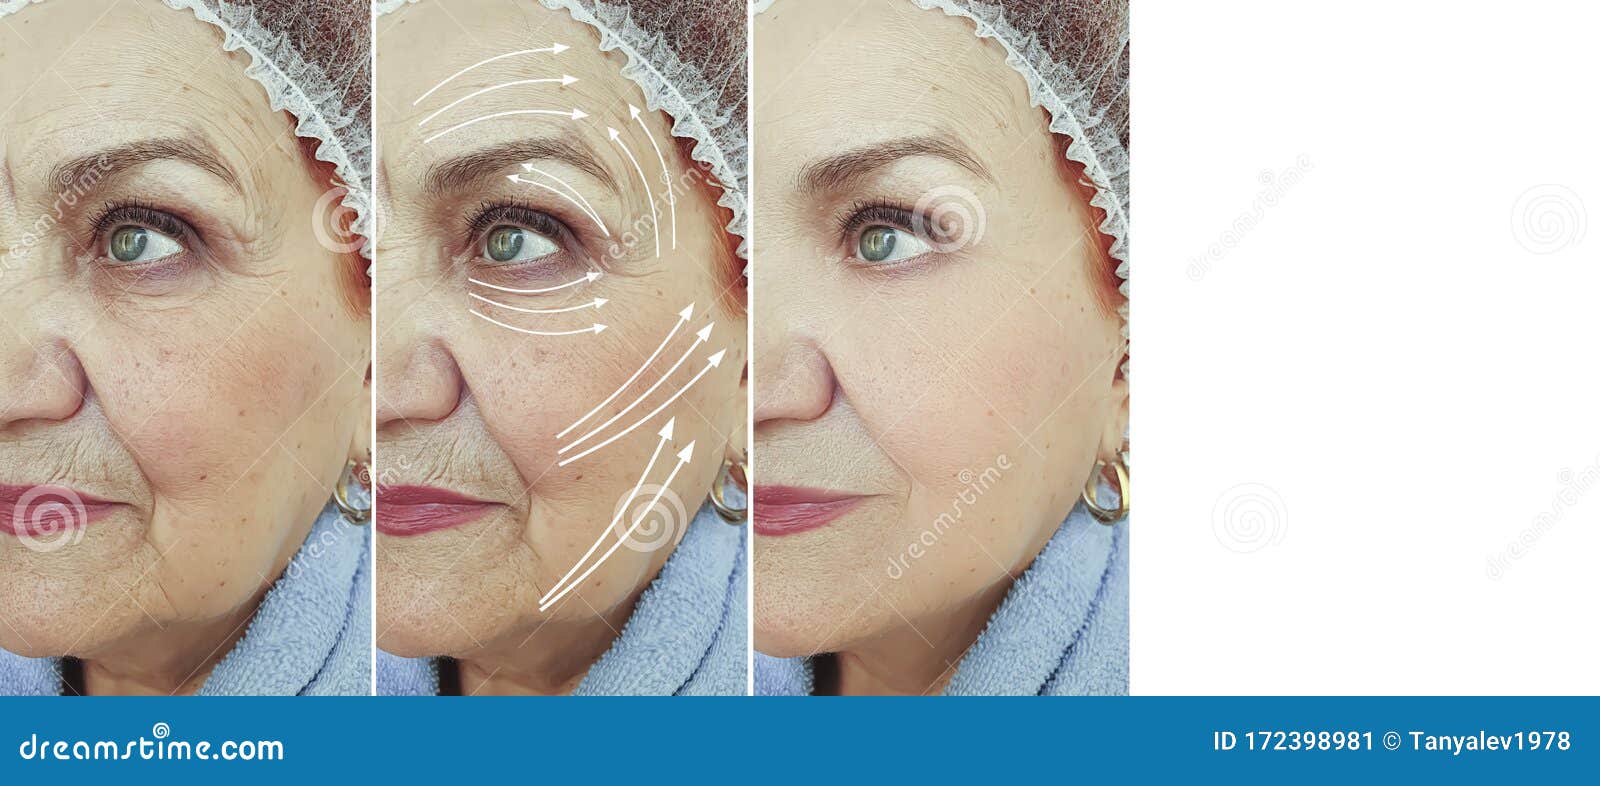 face old woman wrinkles before  after cosmetology  arrow plastic correction mature tension rejuvenation treatment